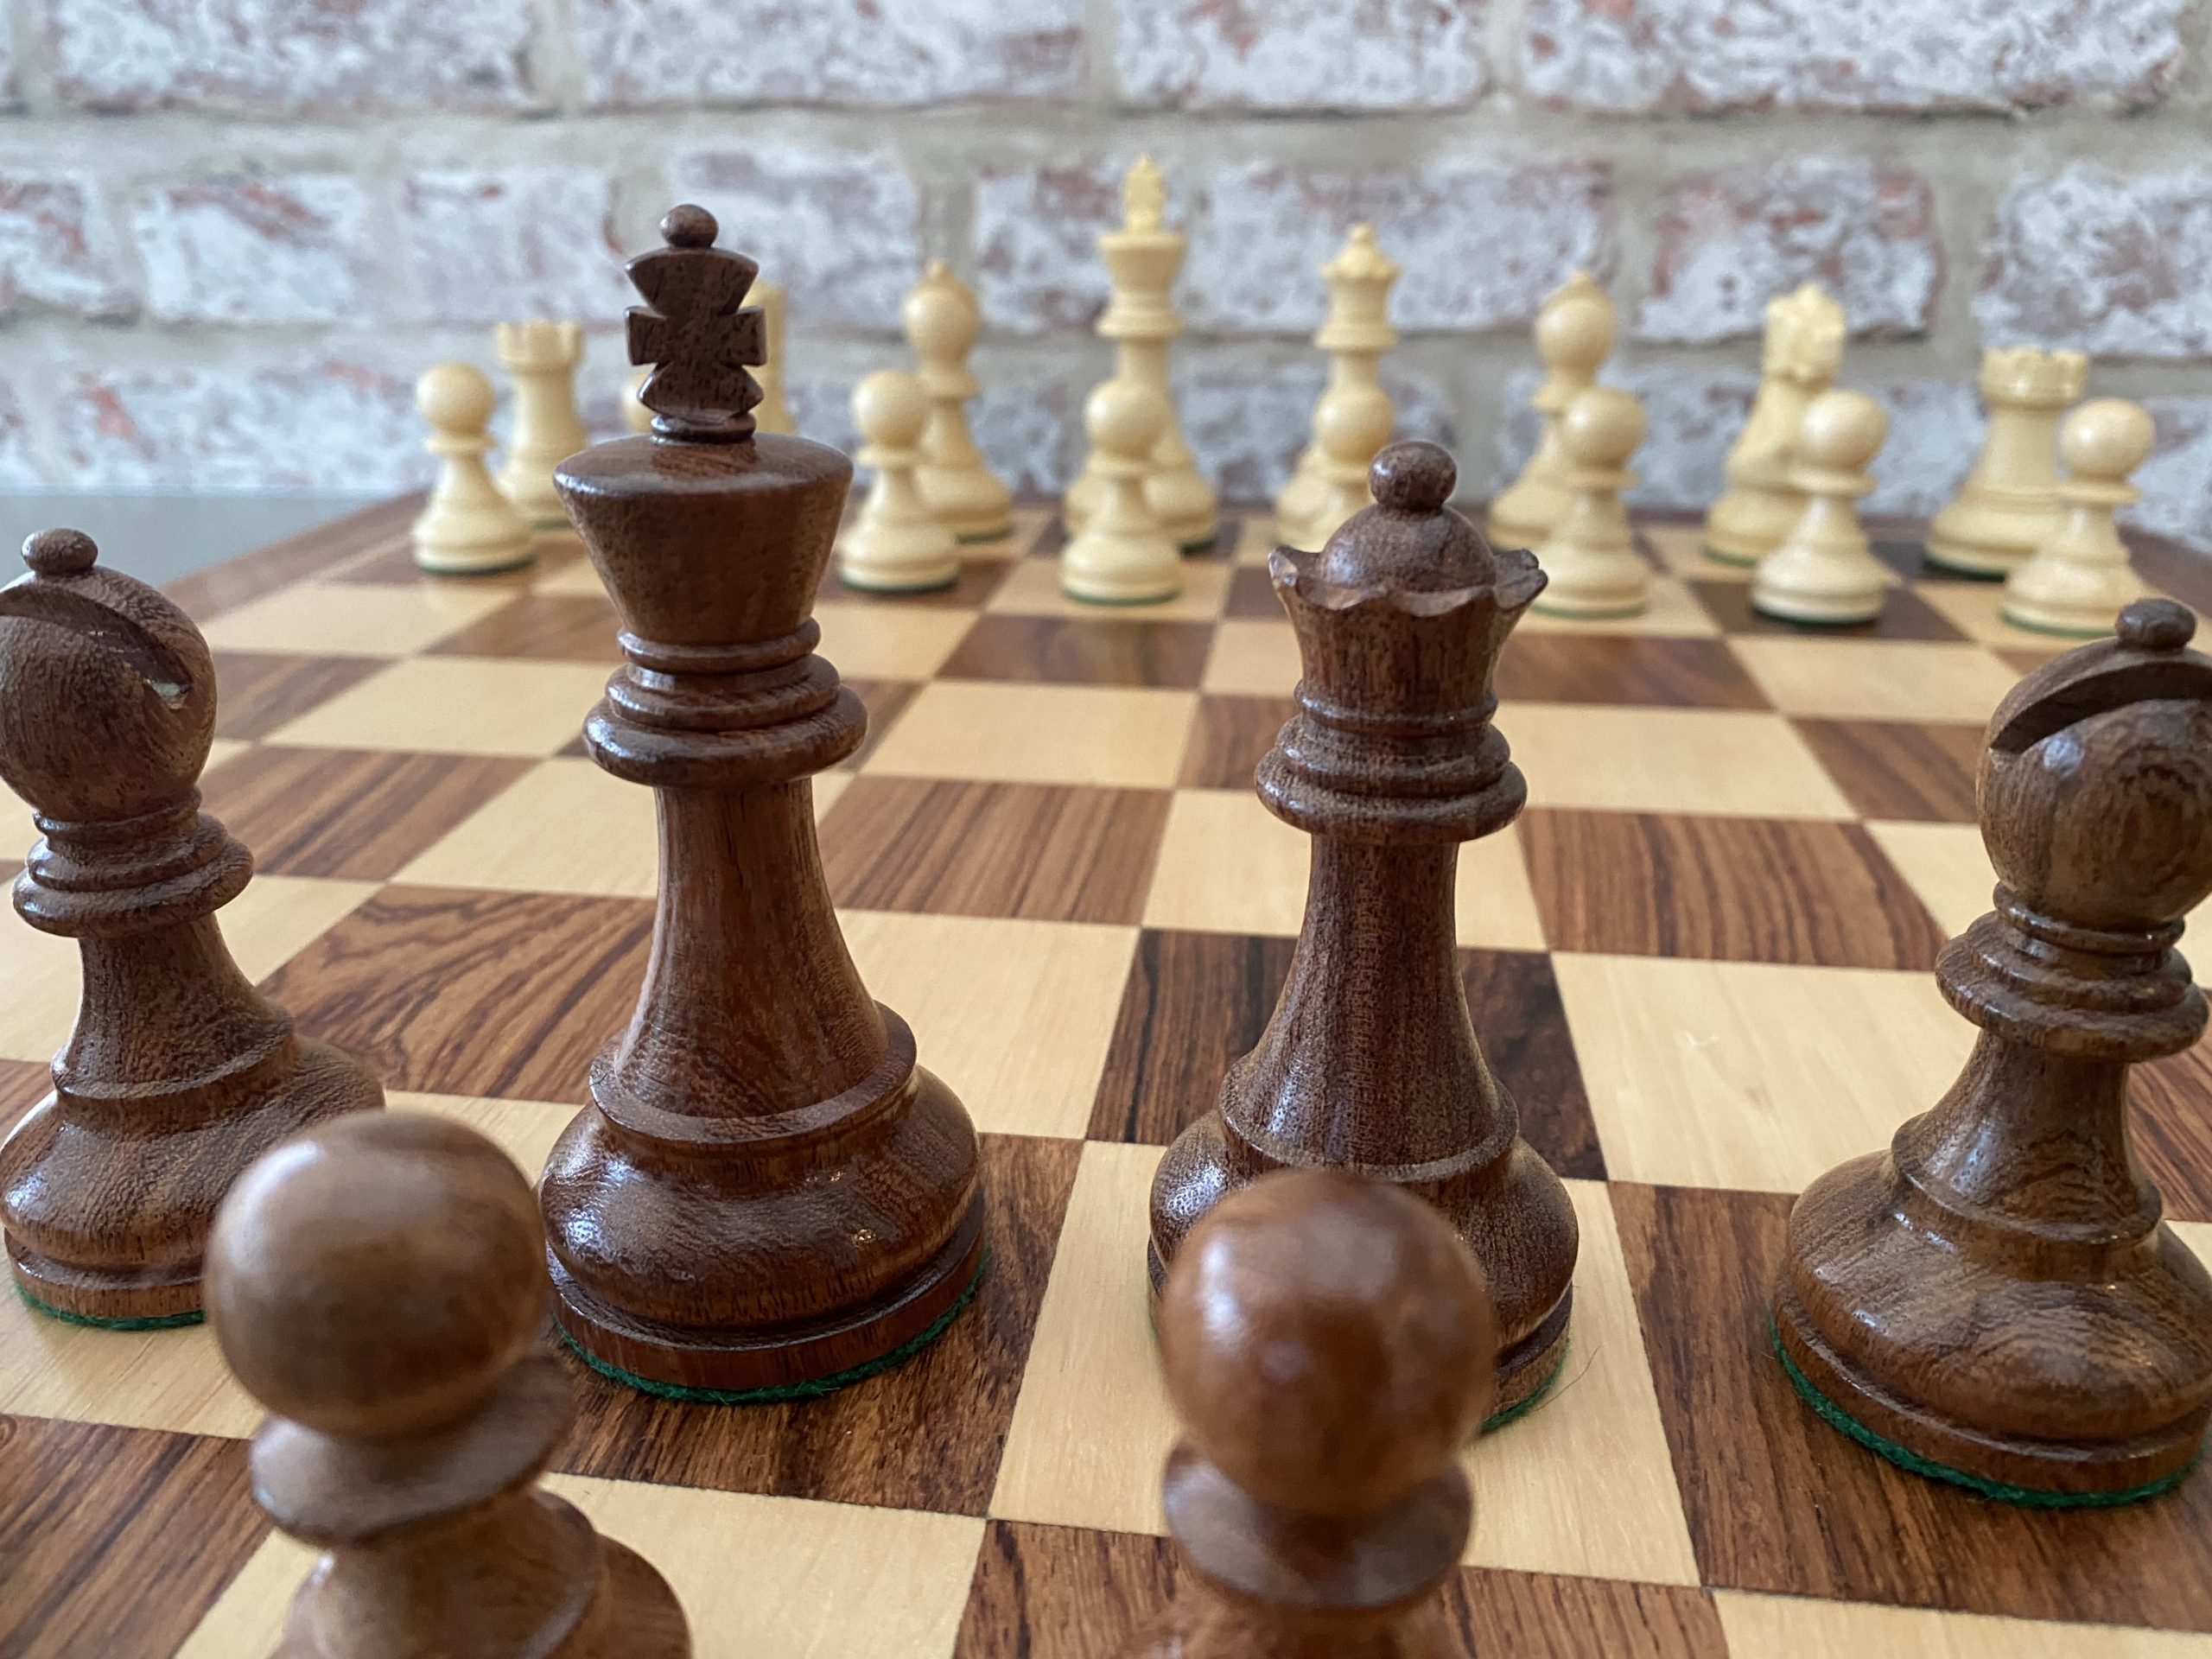 Best chess sets to buy in 2023